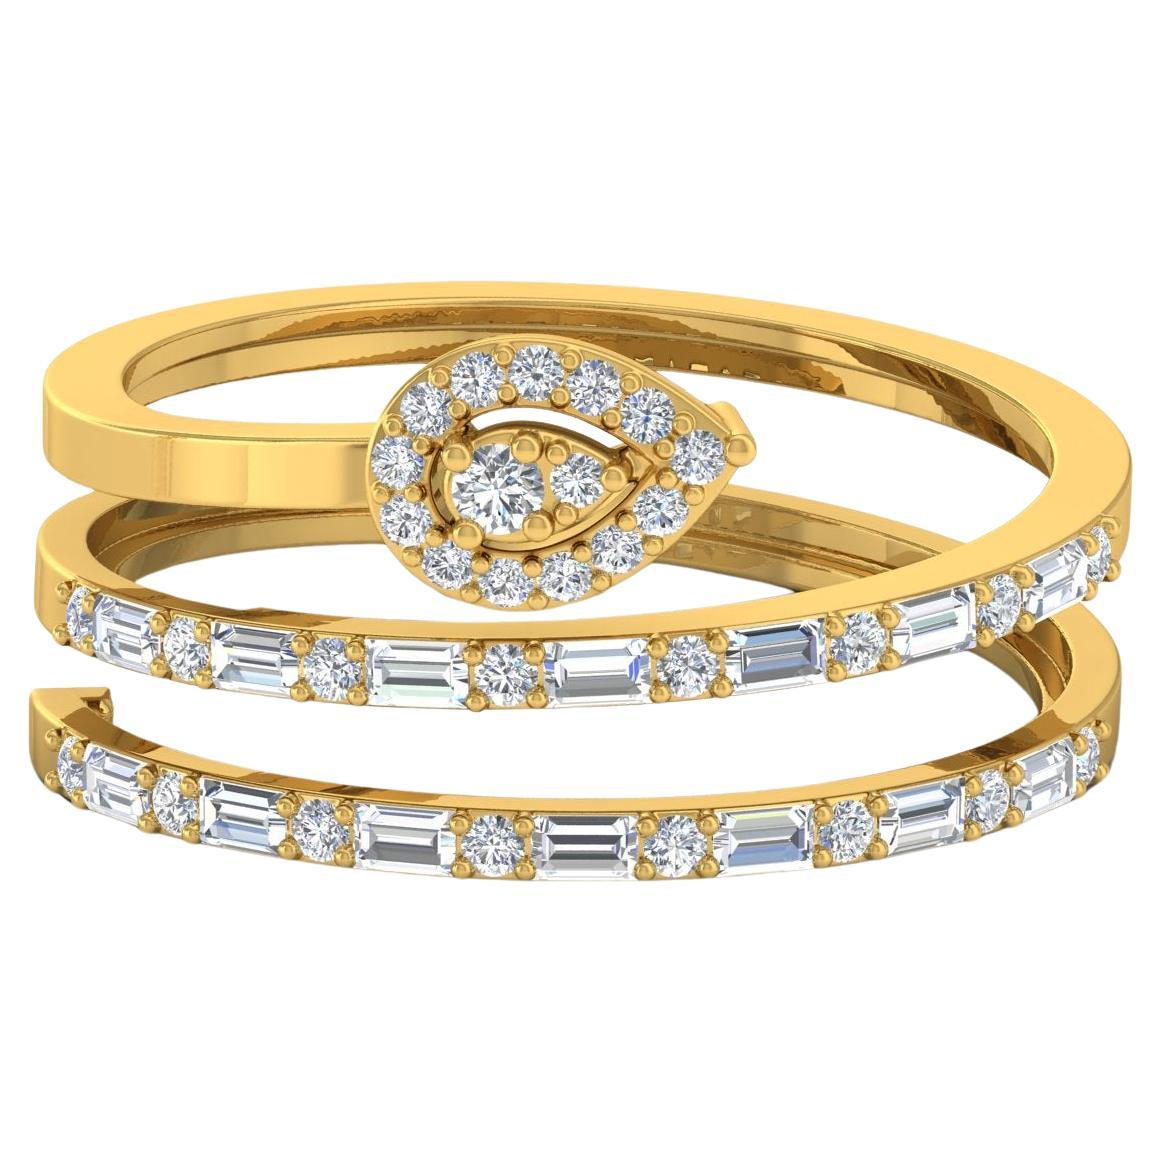 For Sale:  SI Clarity HI Color Baguette Diamond Spiral Ring 18 Karat Yellow Gold Jewelry